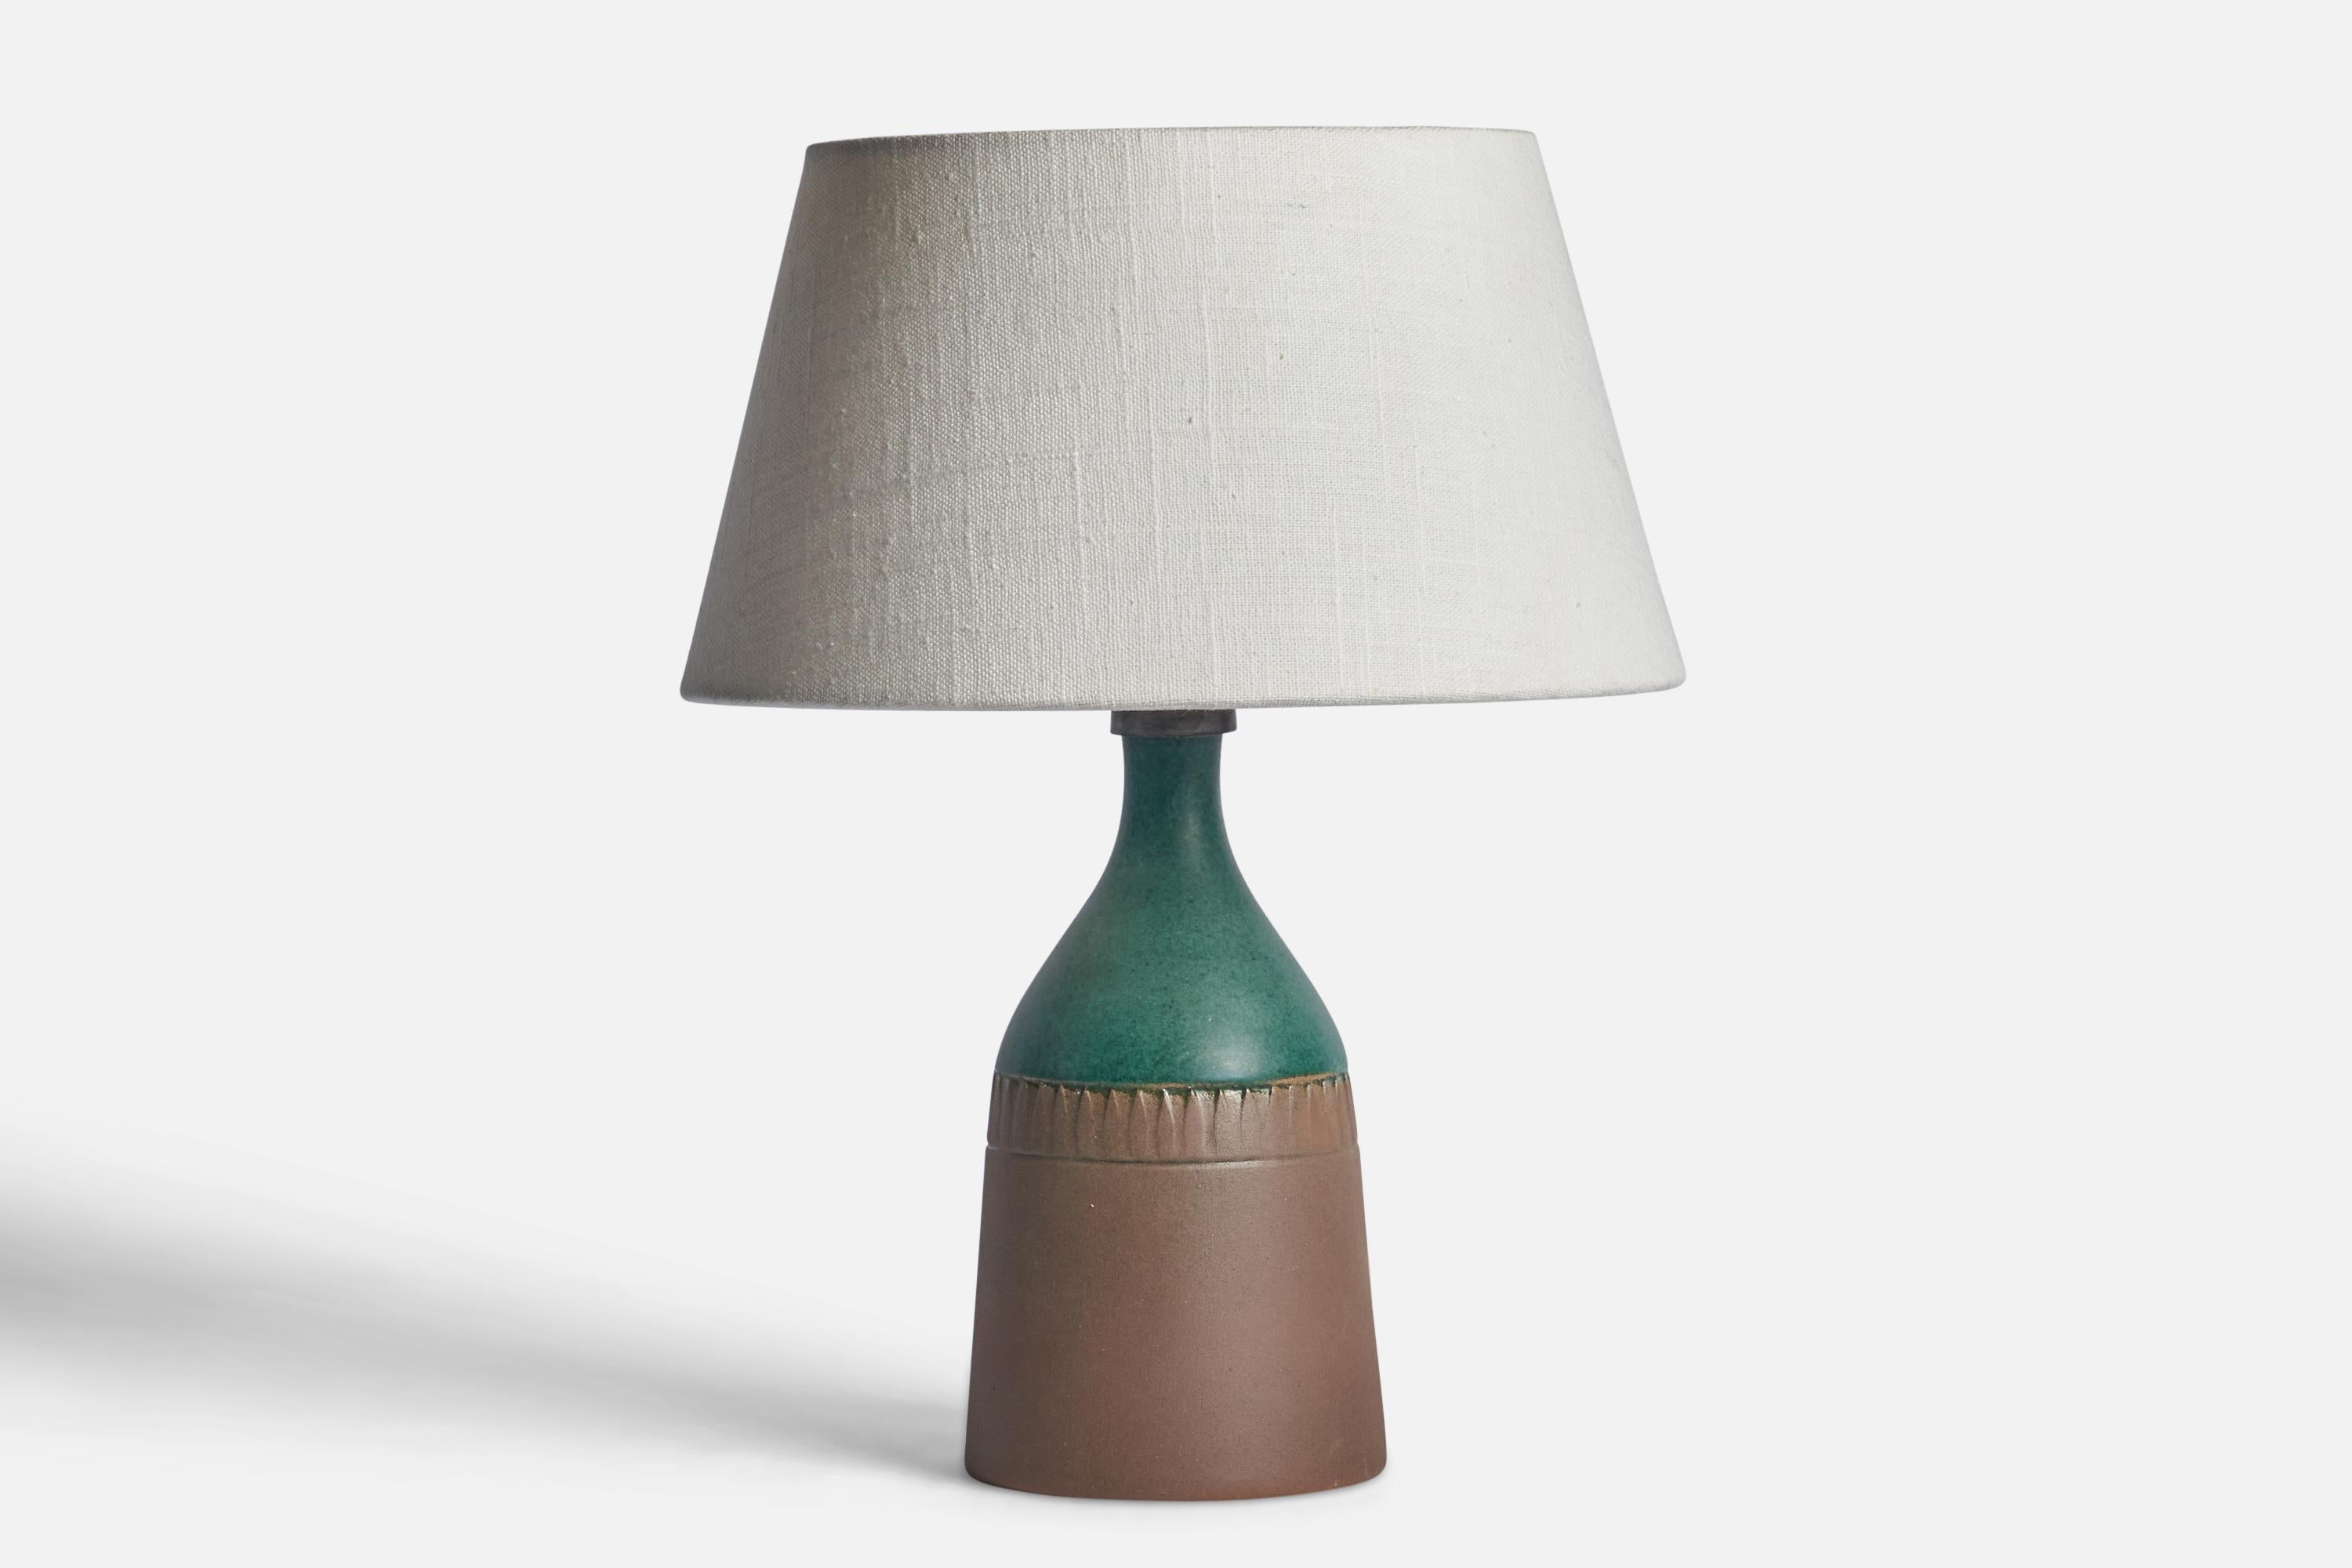 A green semi-glazed stoneware table lamp designed and produced in Sweden, c. 1960s.

Dimensions of Lamp (inches): 10.25